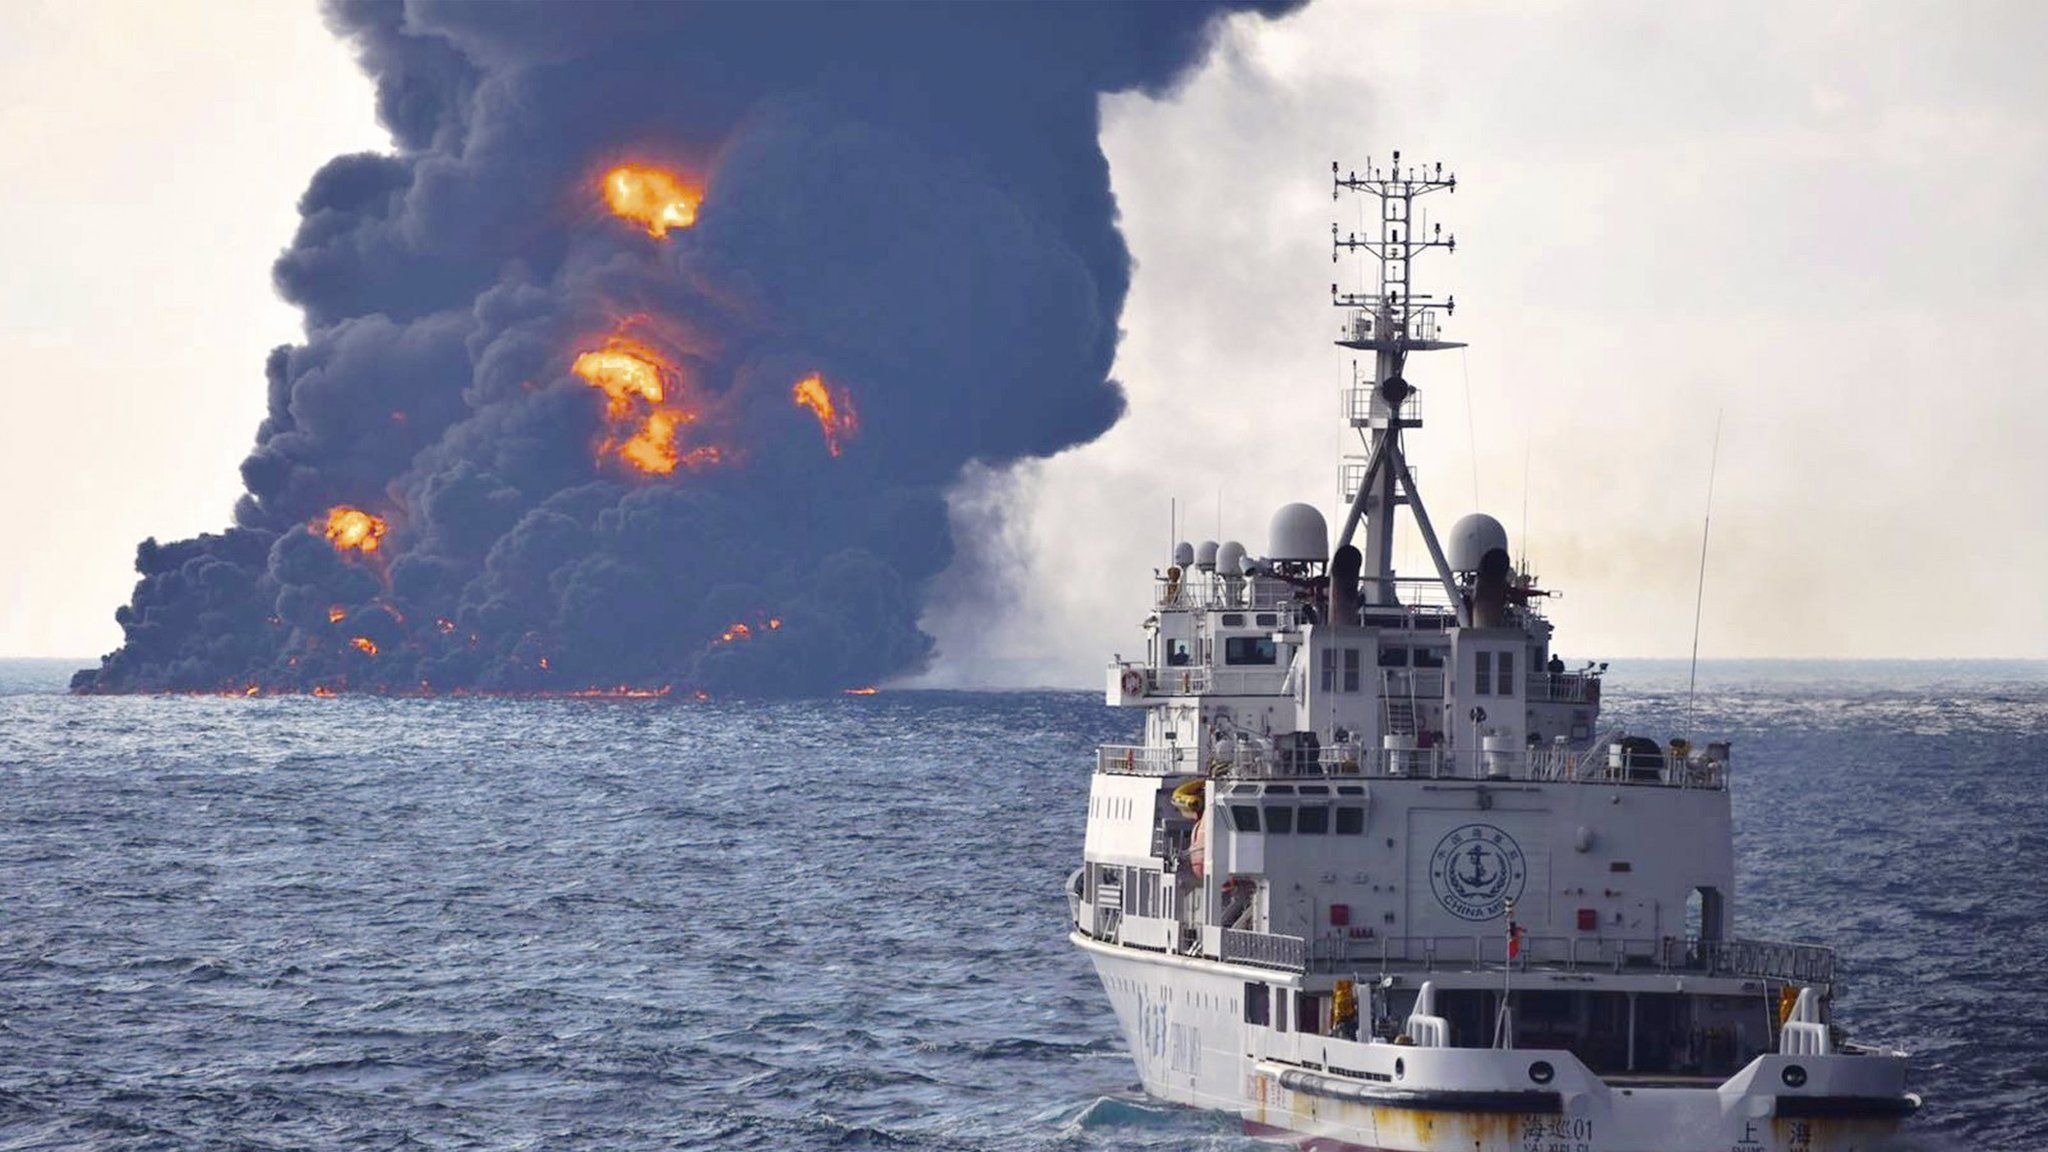 A handout photo made available by the Transport Ministry of China on 15 January 2018 shows the fire on the Panama-registered tanker "Sanchi" after a collision with Hong Kong-registered freighter "CF Crystal," off China"s eastern coast, 14 January 2018.